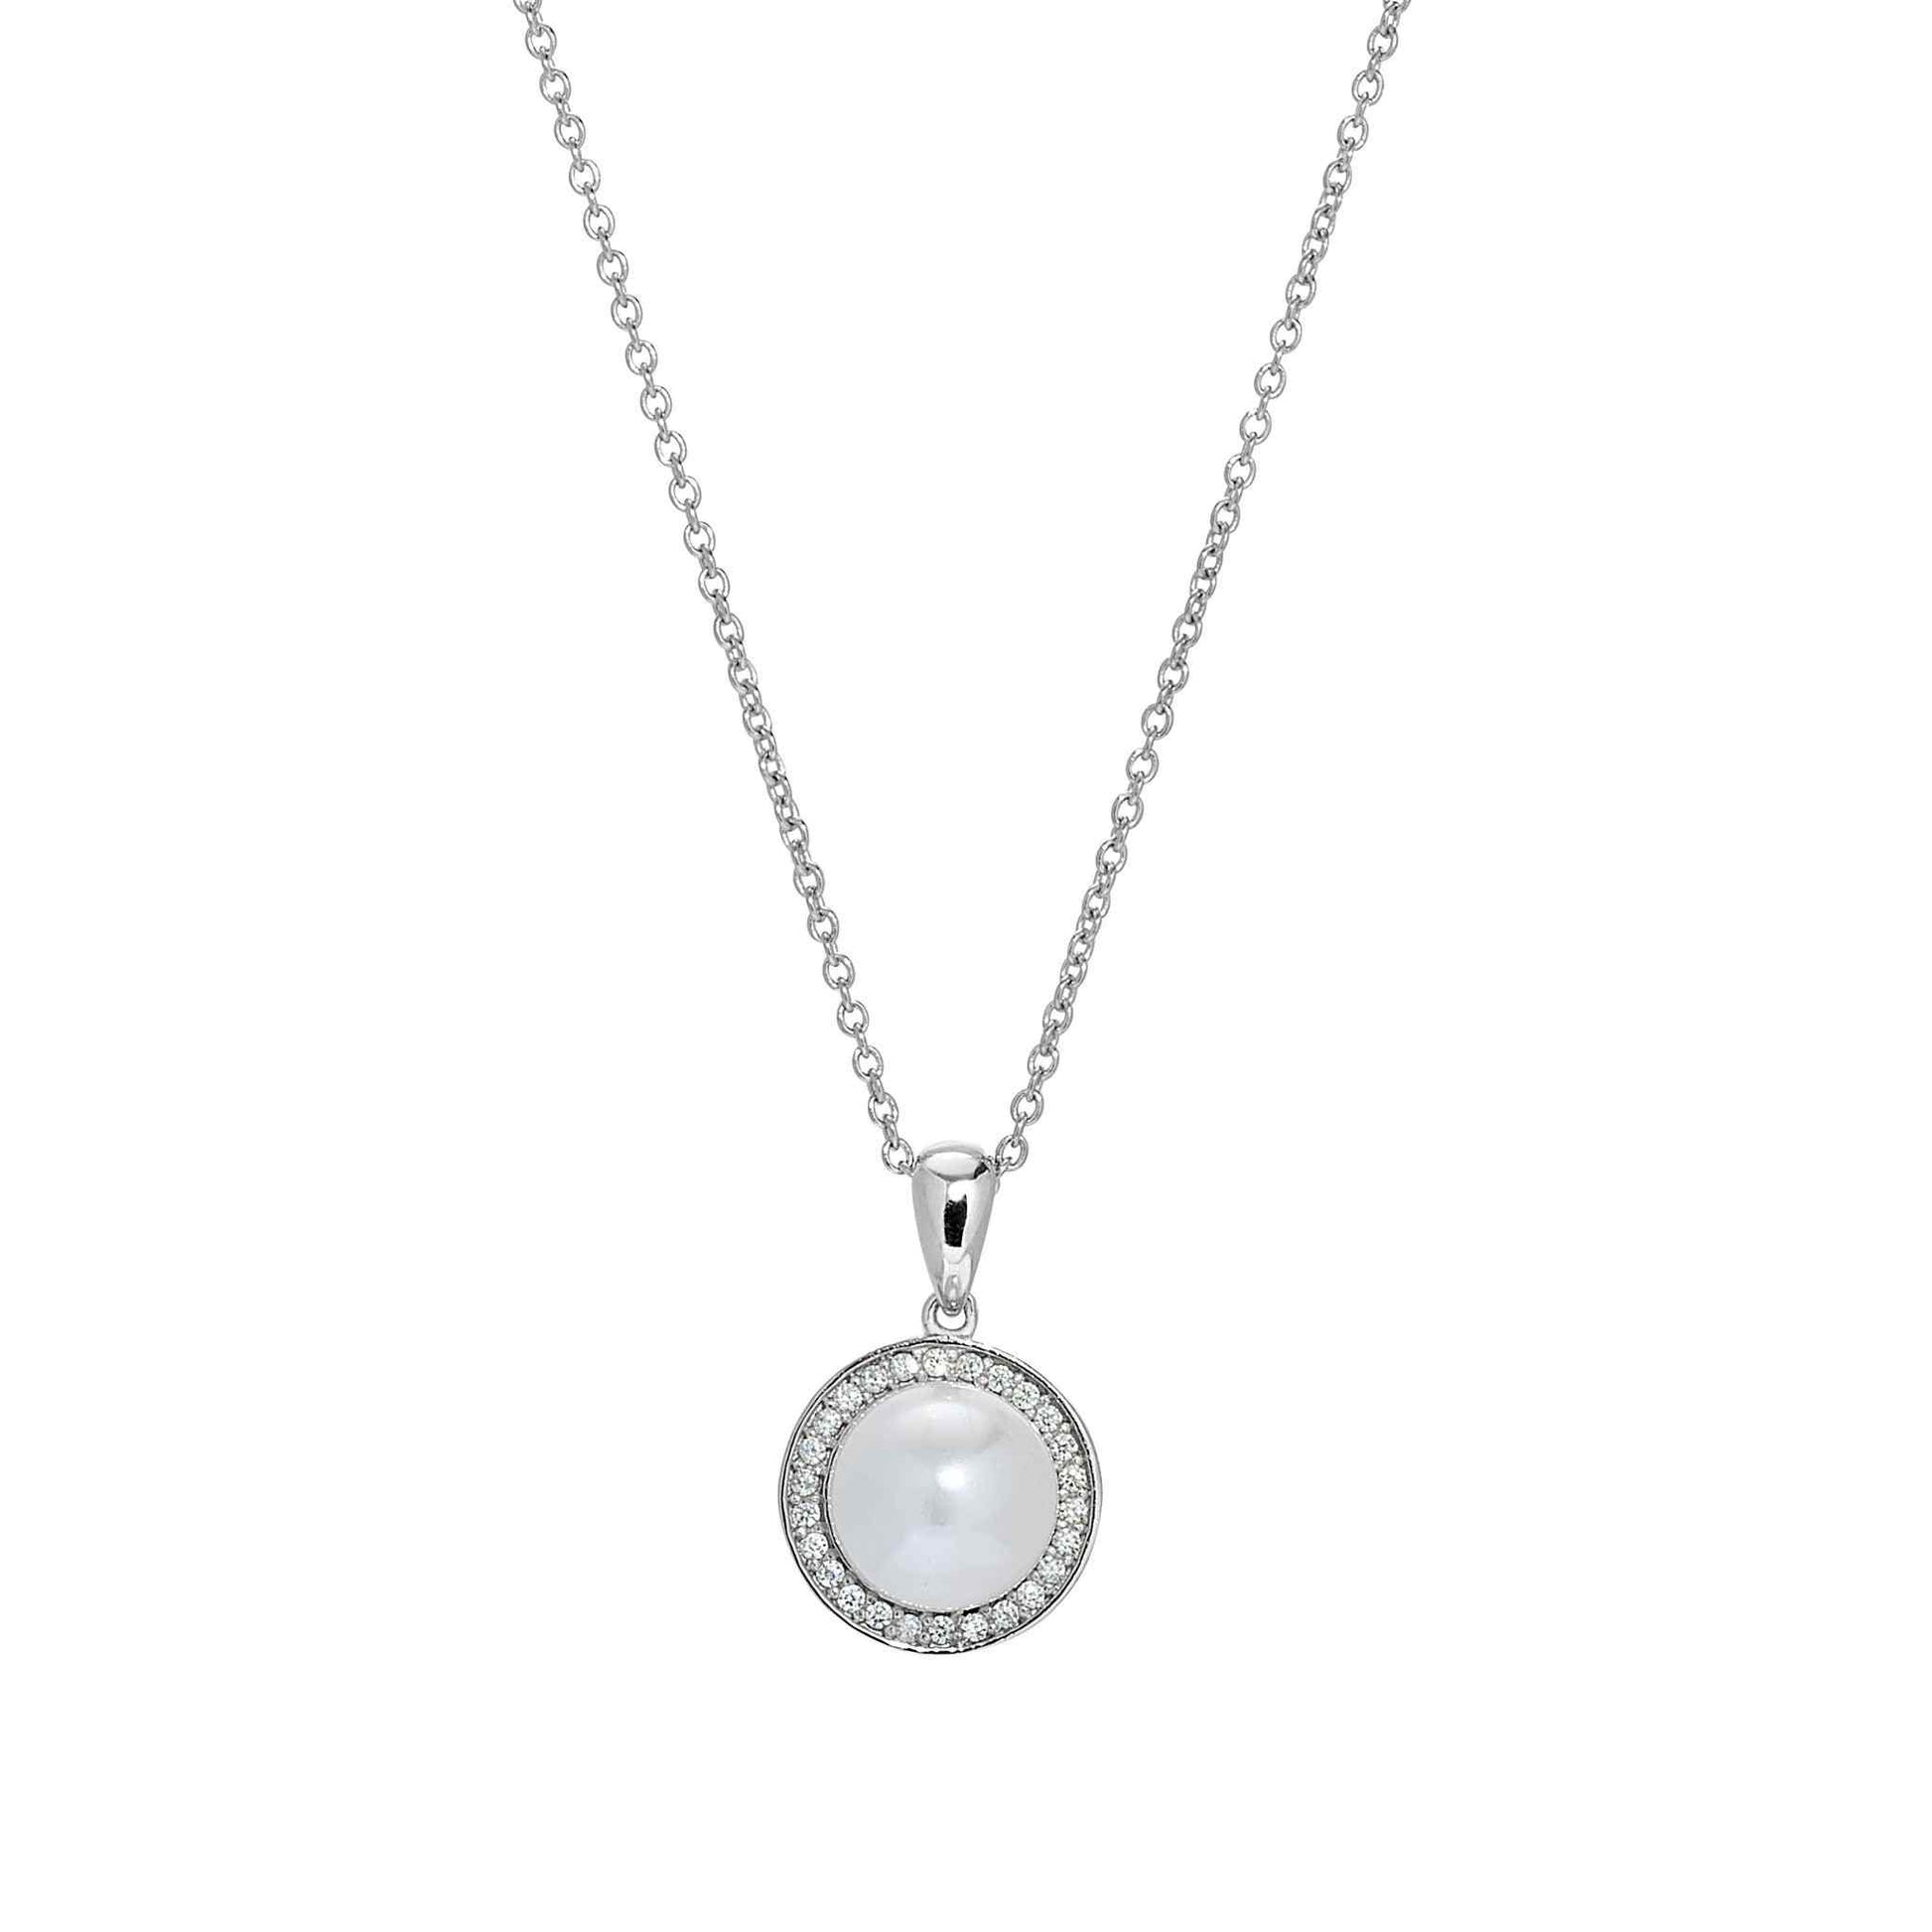 A round cabochon pearl pendant with simulated diamonds displayed on a neutral white background.